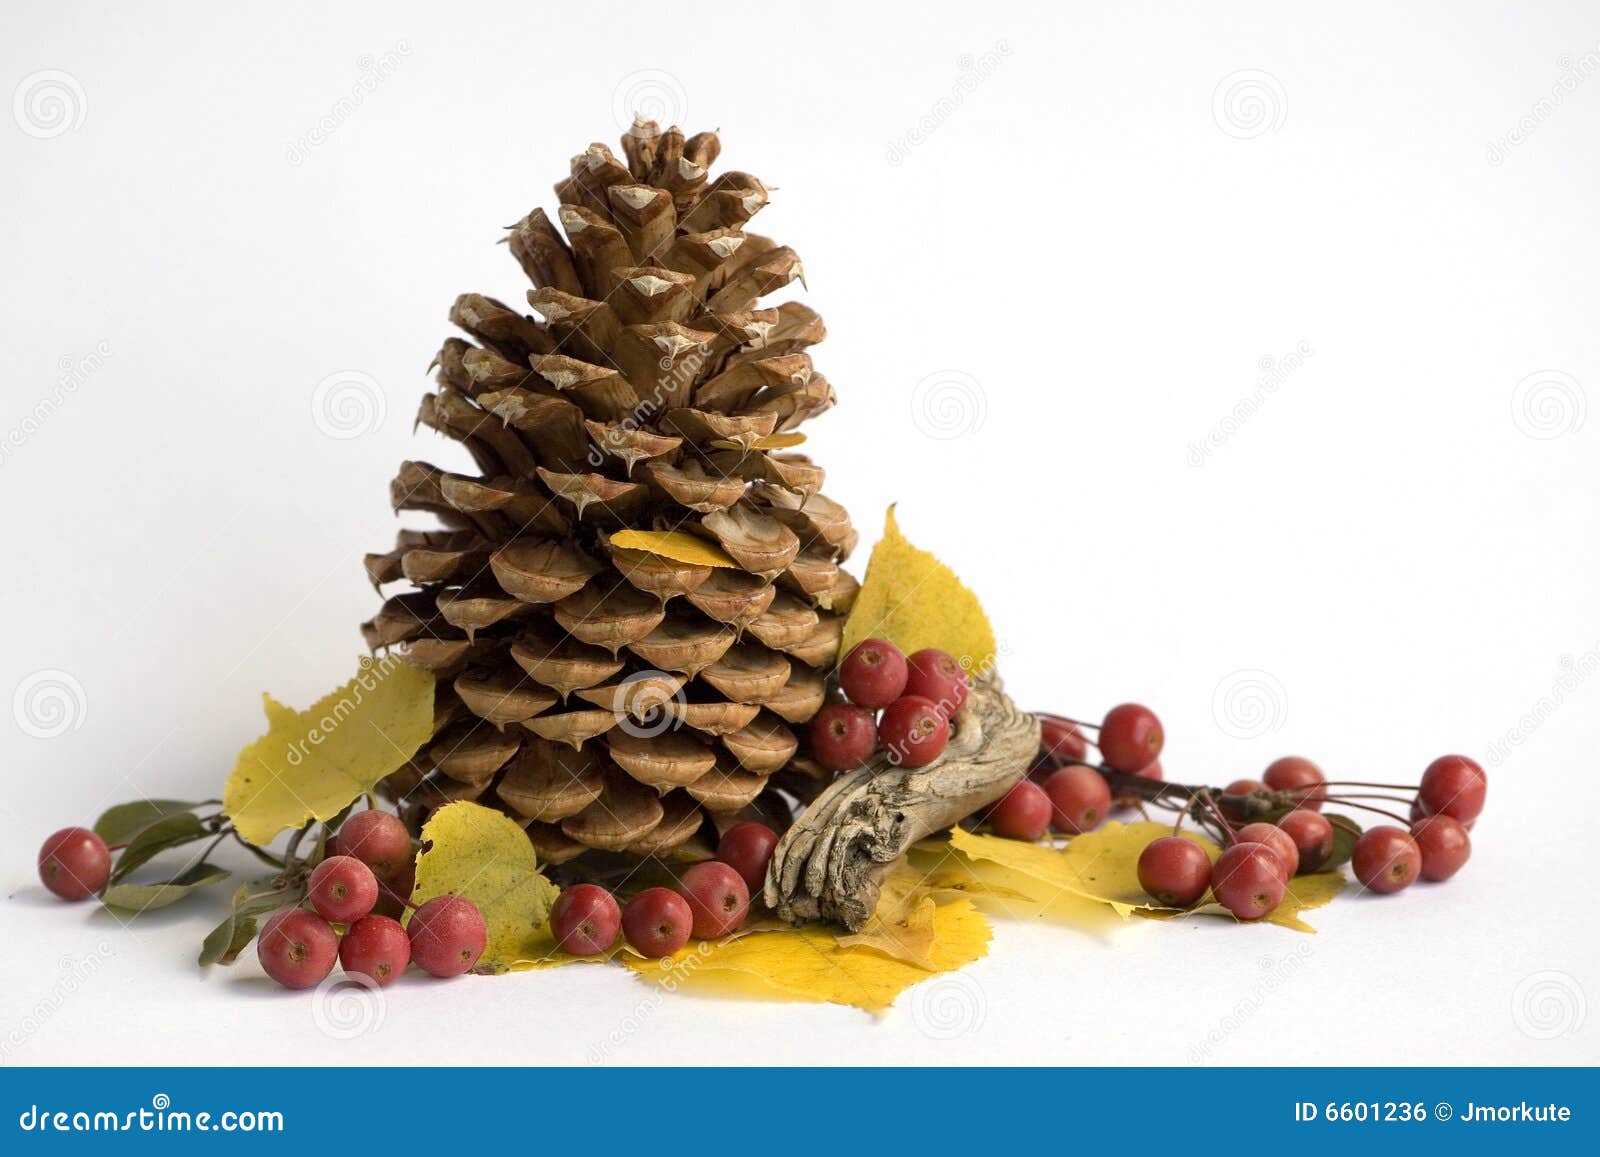 pine cone with berries